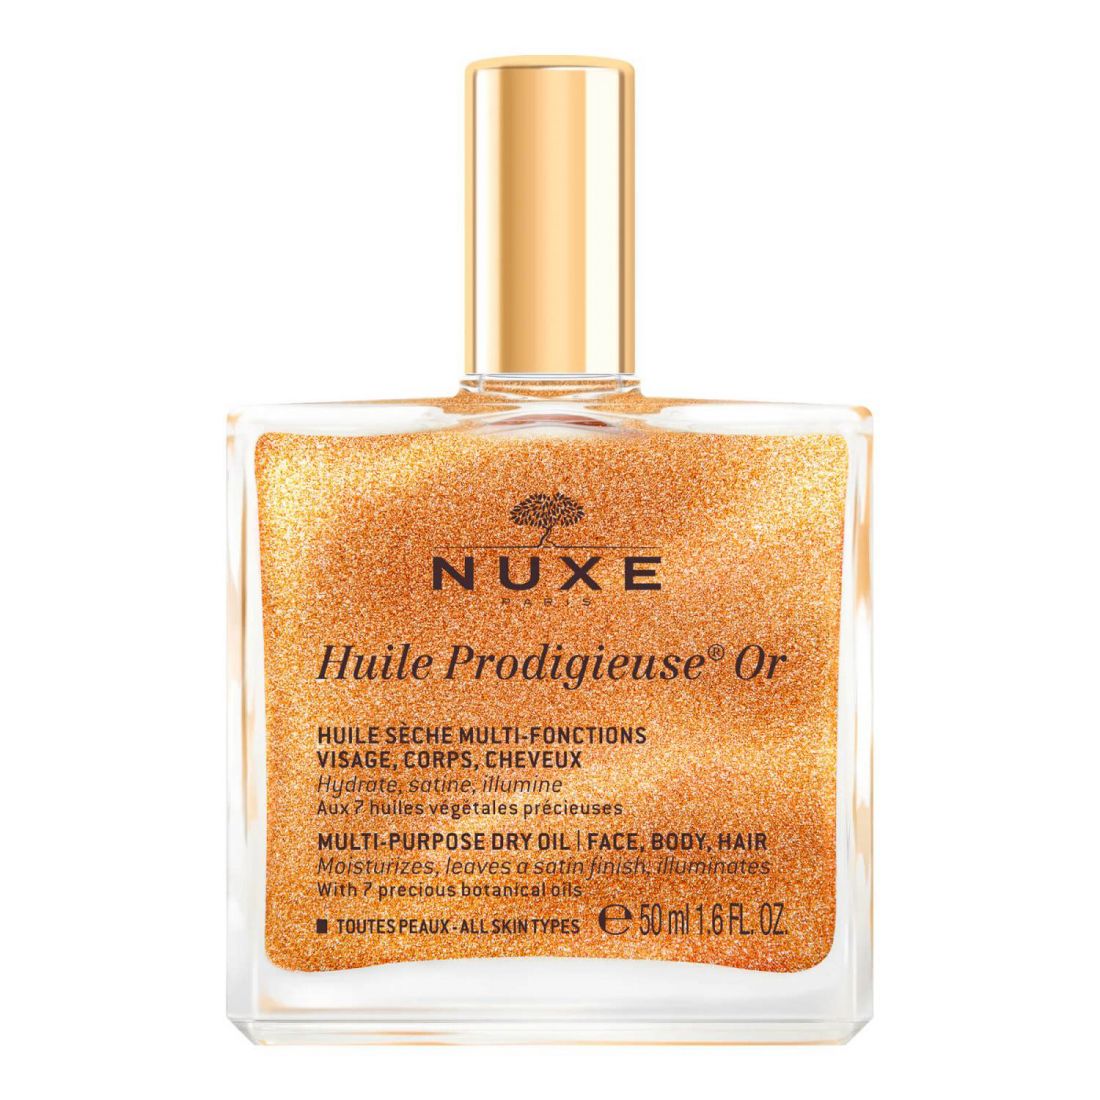 Nuxe - Huile visage, corps et cheveux 'Huile Prodigieuse® Or' - 50 ml